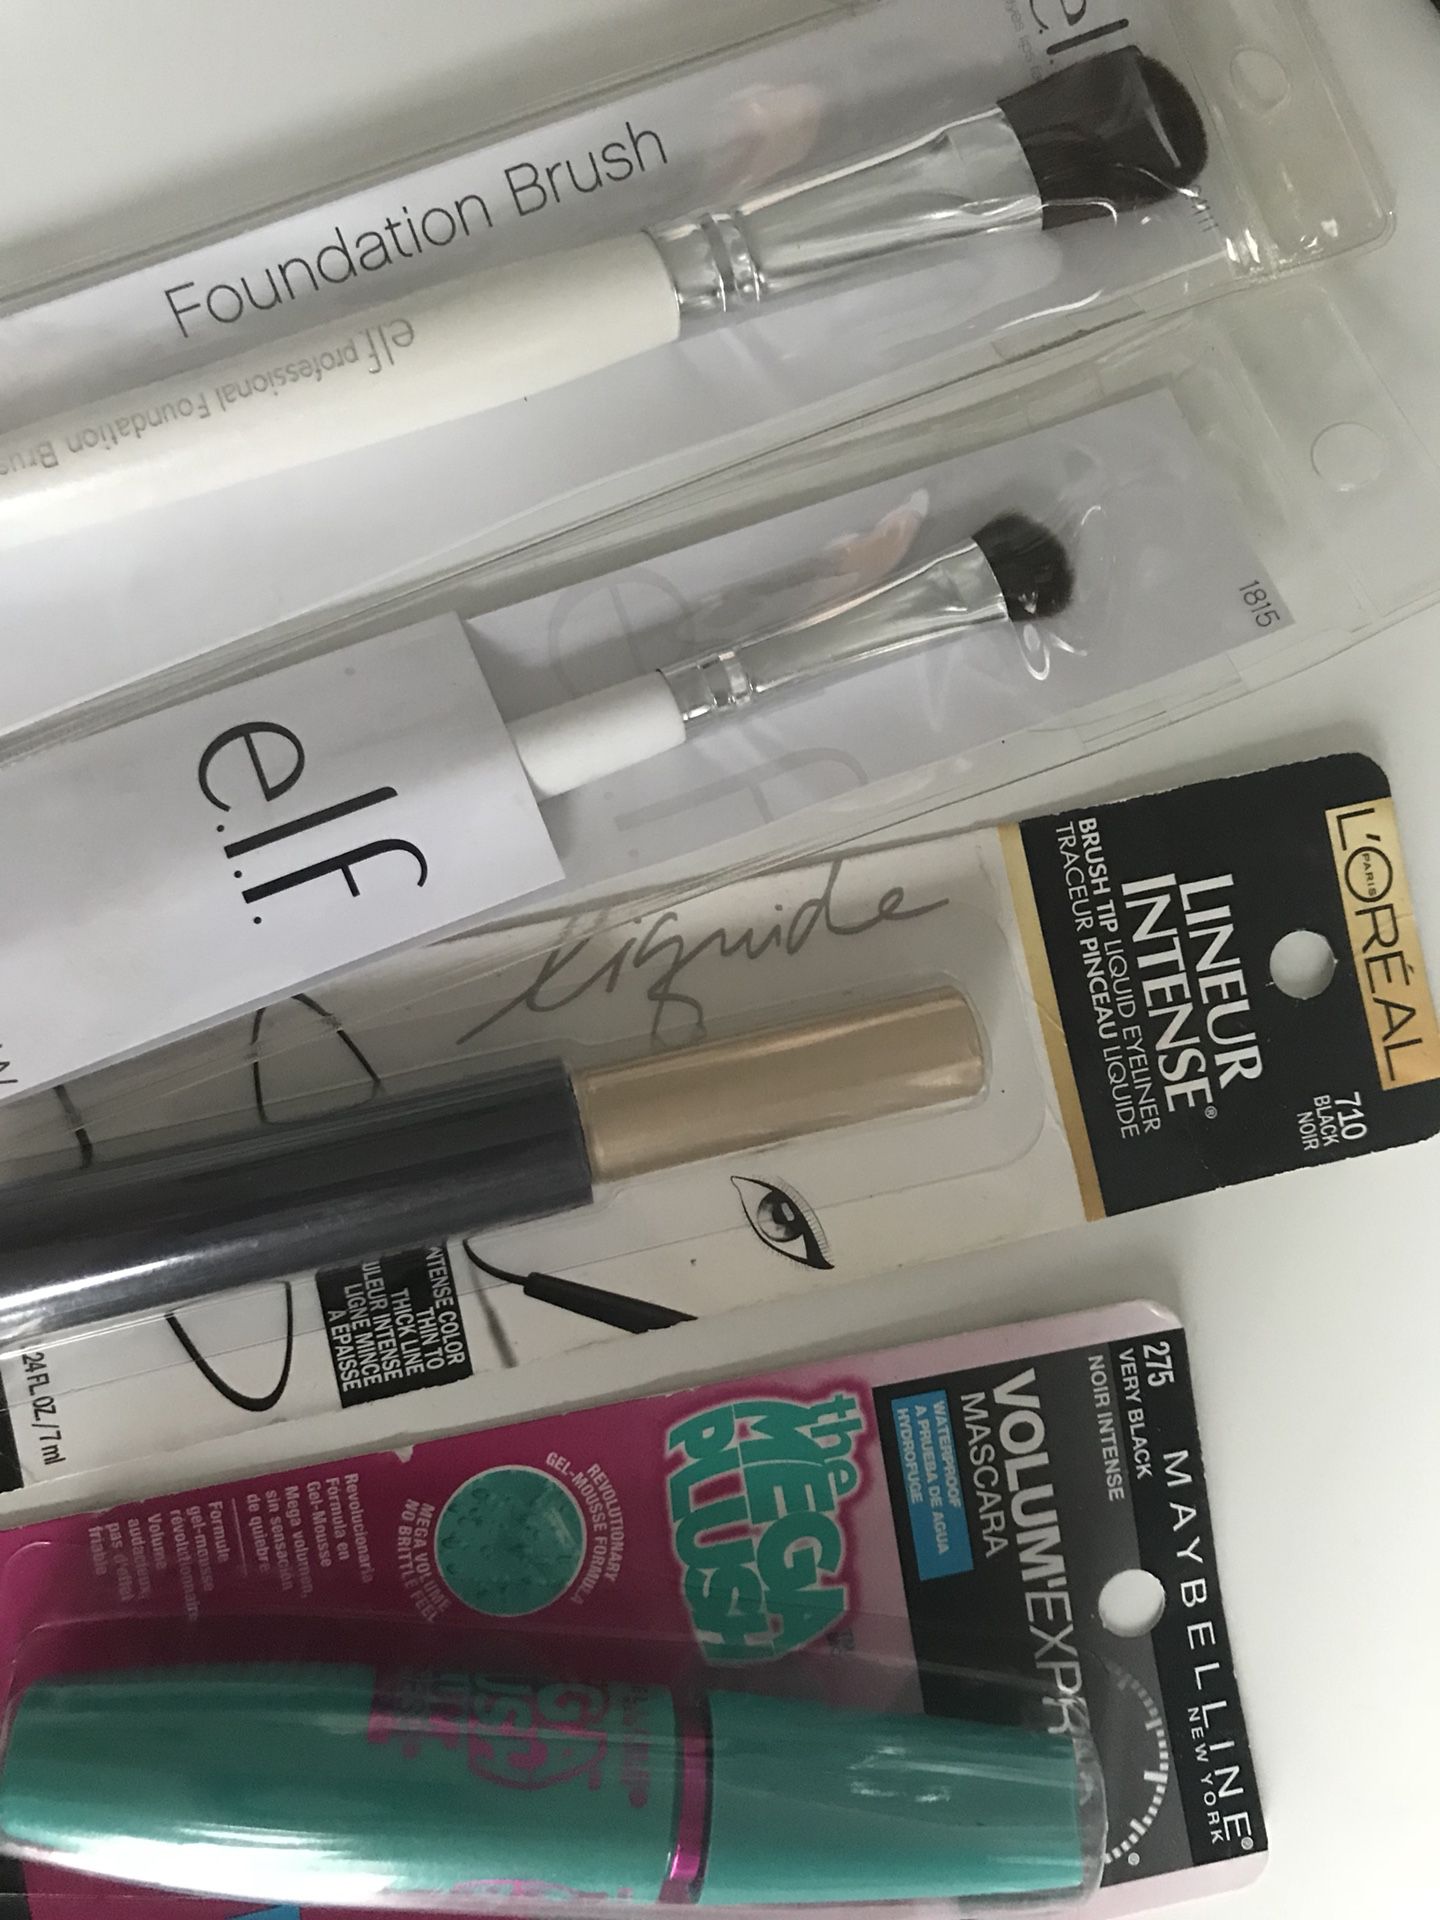 Brand new mascara, liquid eyeliner, elf eyeshadow and foundation brush , fenty beauty by Rihanna (color is Ridlllc) going through all my makeup and g